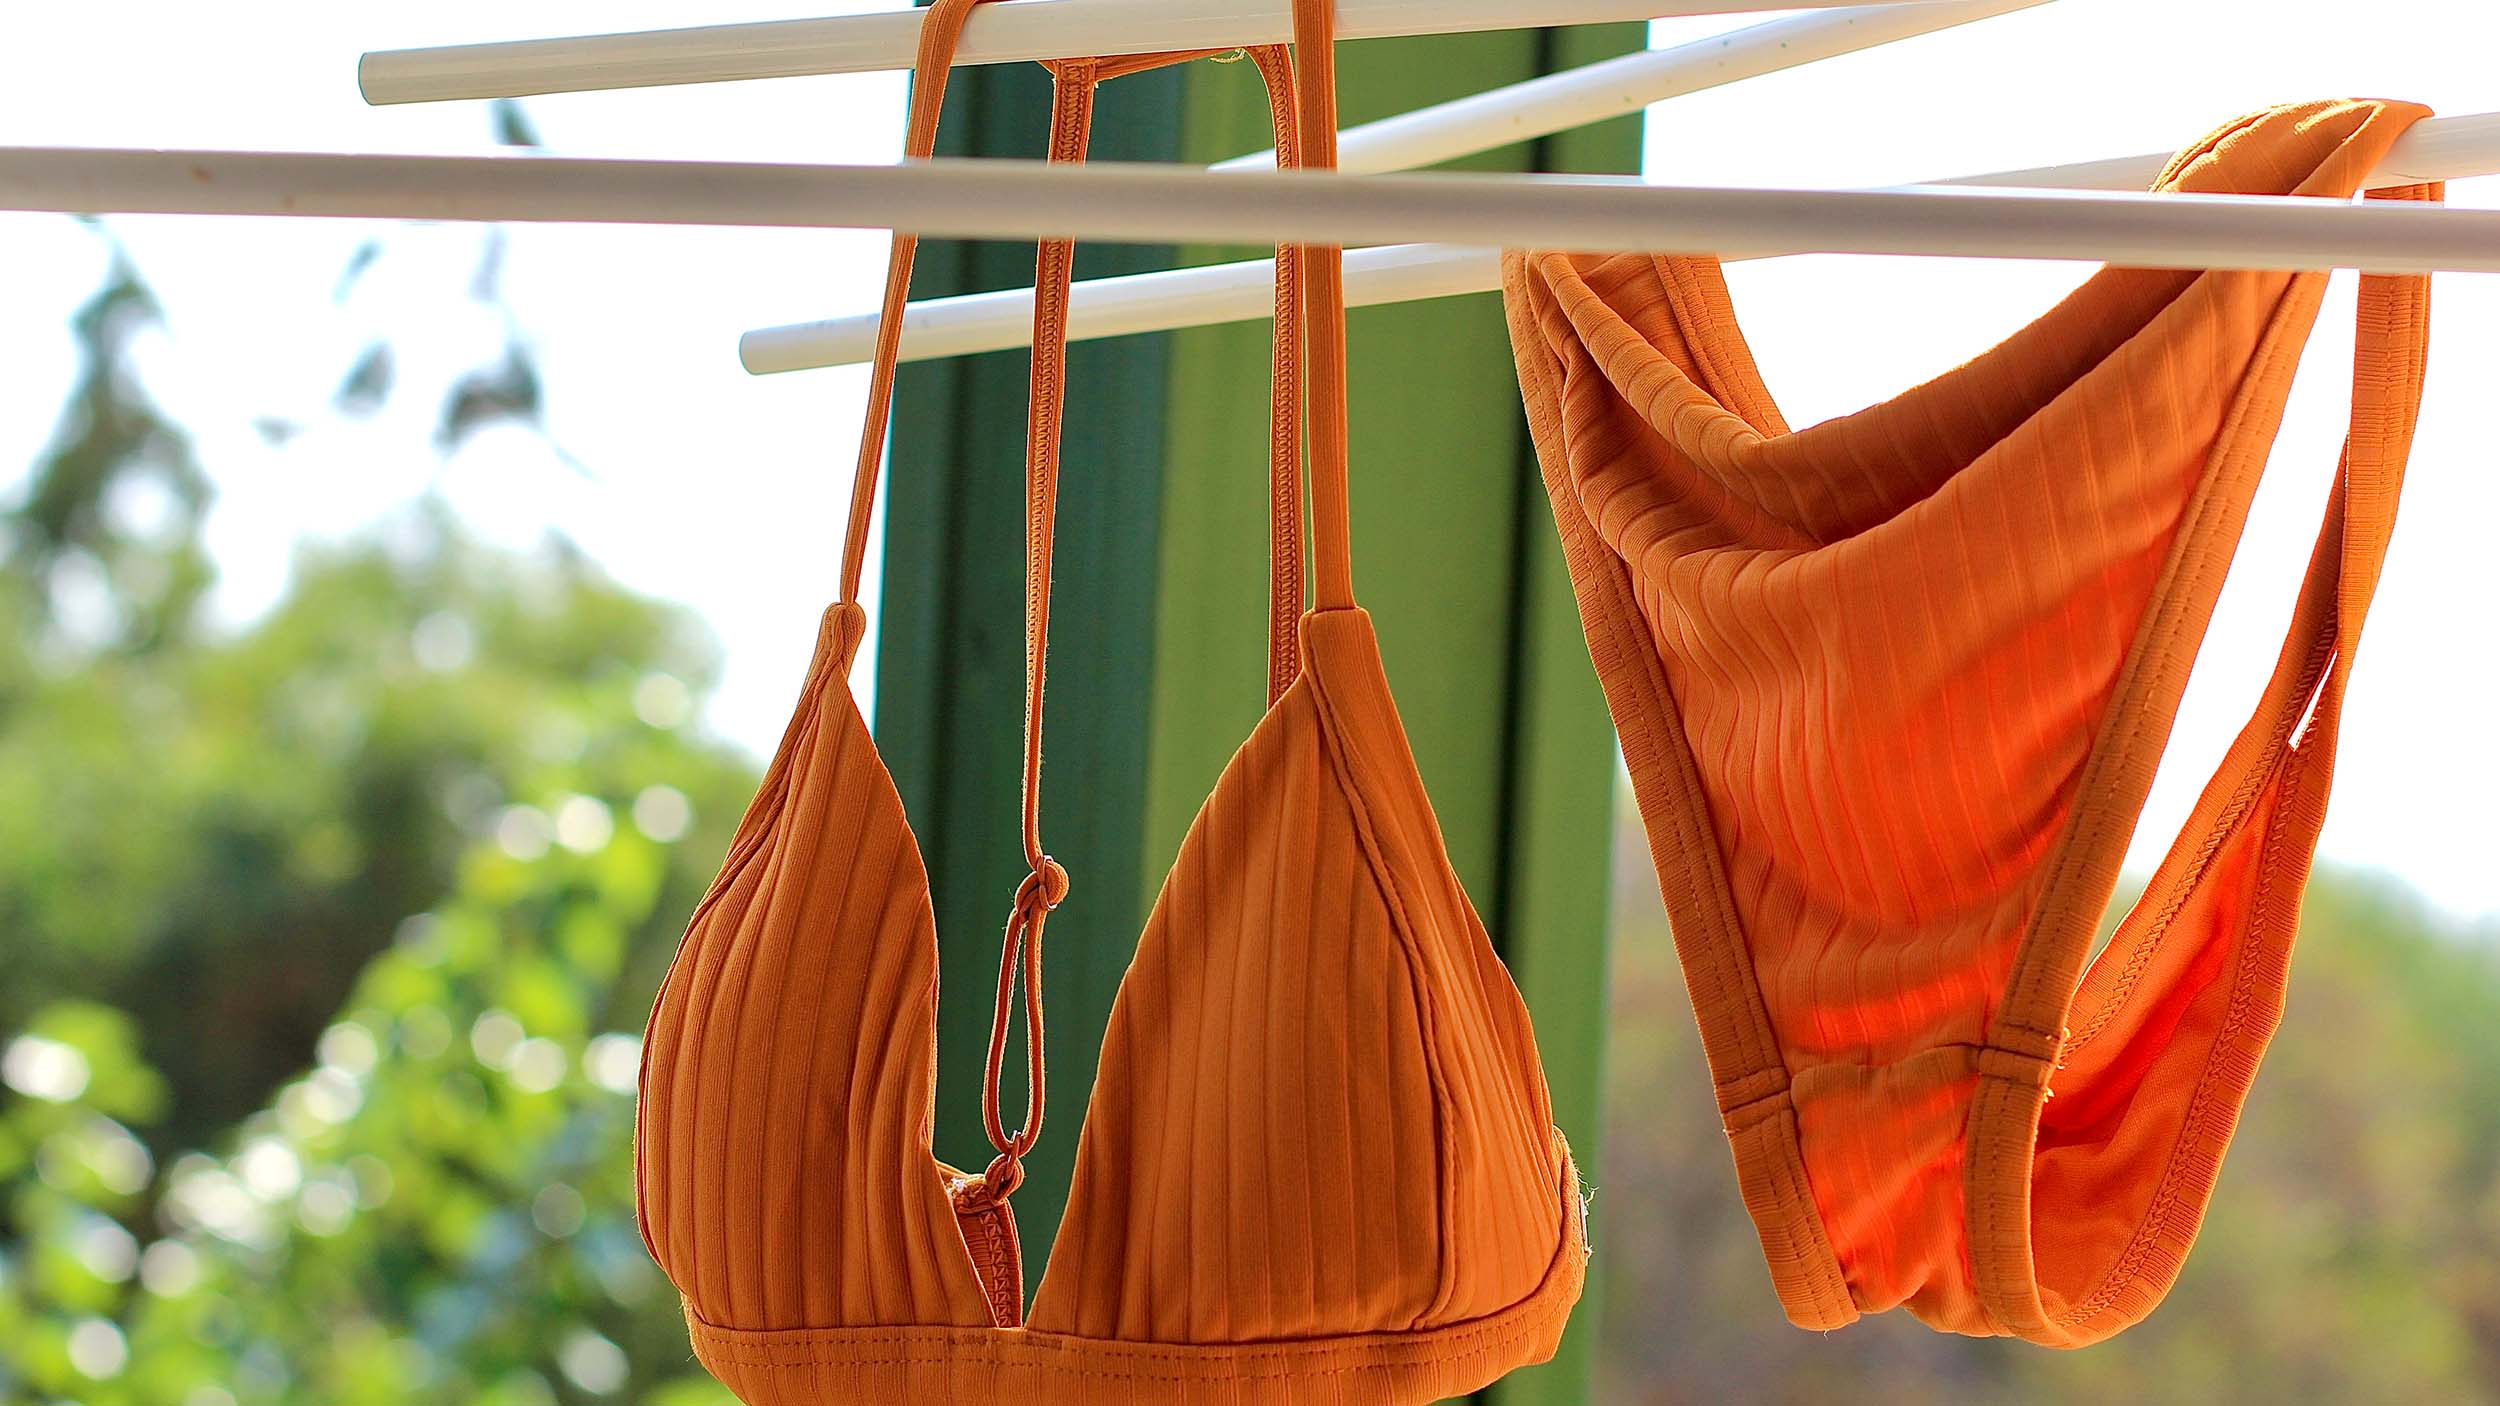 How to properly wash your bathing suits, according to experts